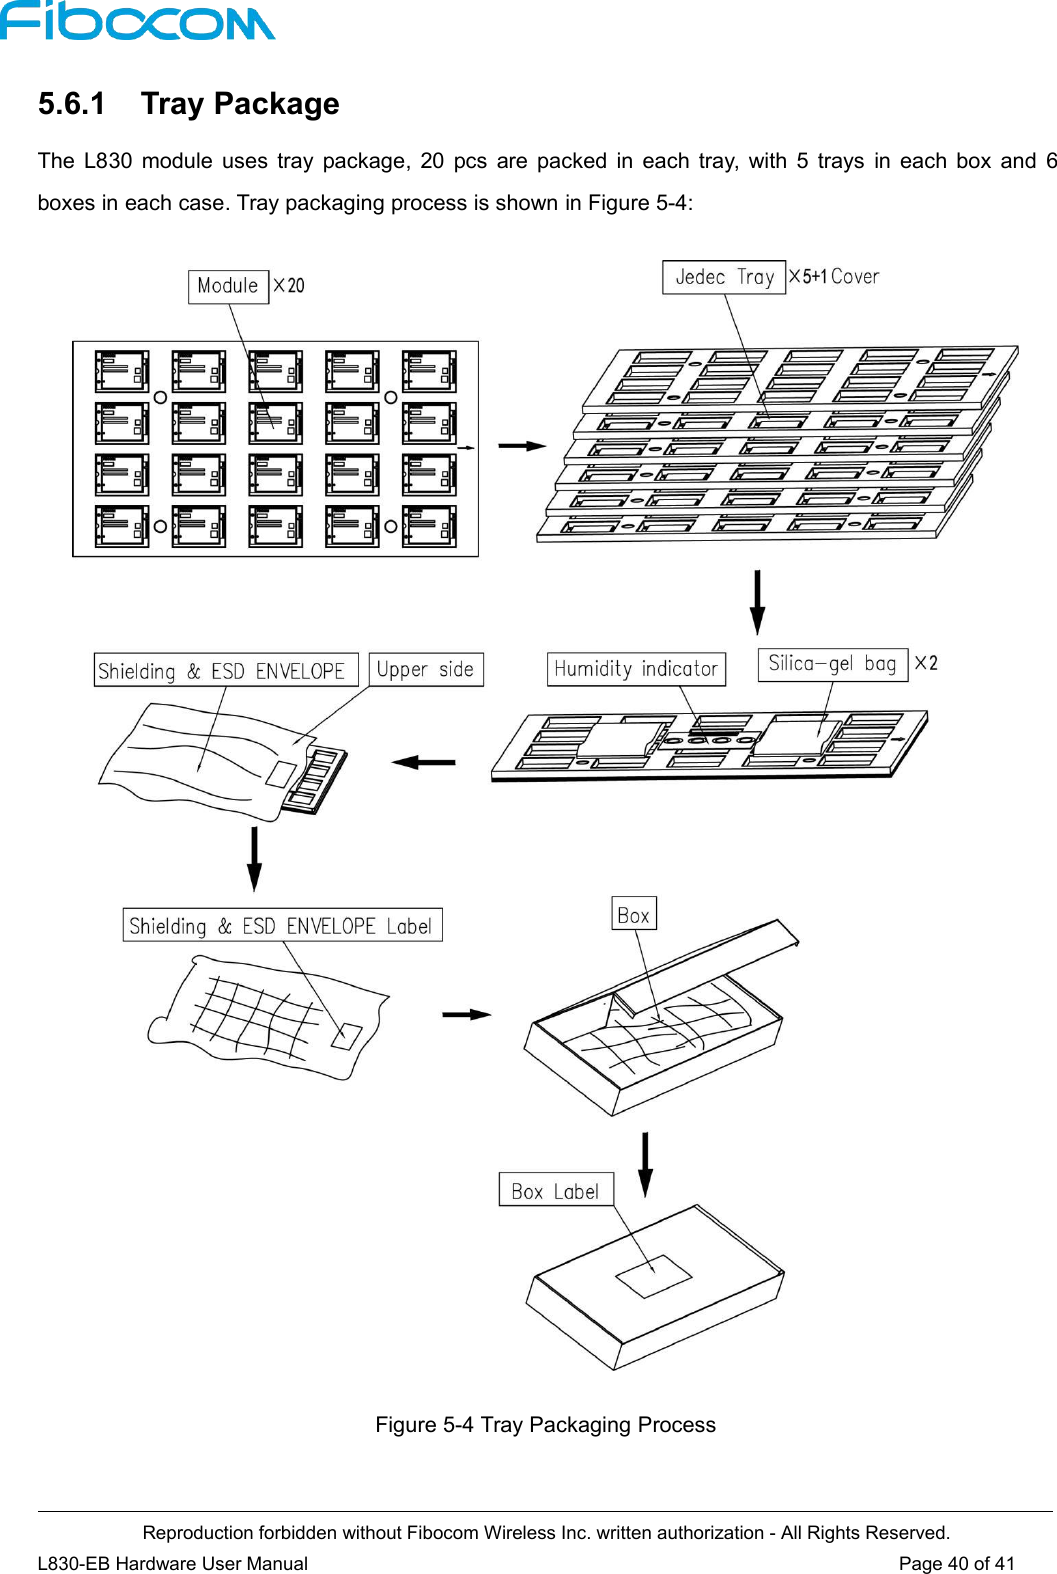 Reproduction forbidden without Fibocom Wireless Inc. written authorization - All Rights Reserved.L830-EB Hardware User Manual Page 40 of 415.6.1 Tray PackageThe L830 module uses tray package, 20 pcs are packed in each tray, with 5 trays in each box and 6boxes in each case. Tray packaging process is shown in Figure 5-4:Figure 5-4 Tray Packaging Process